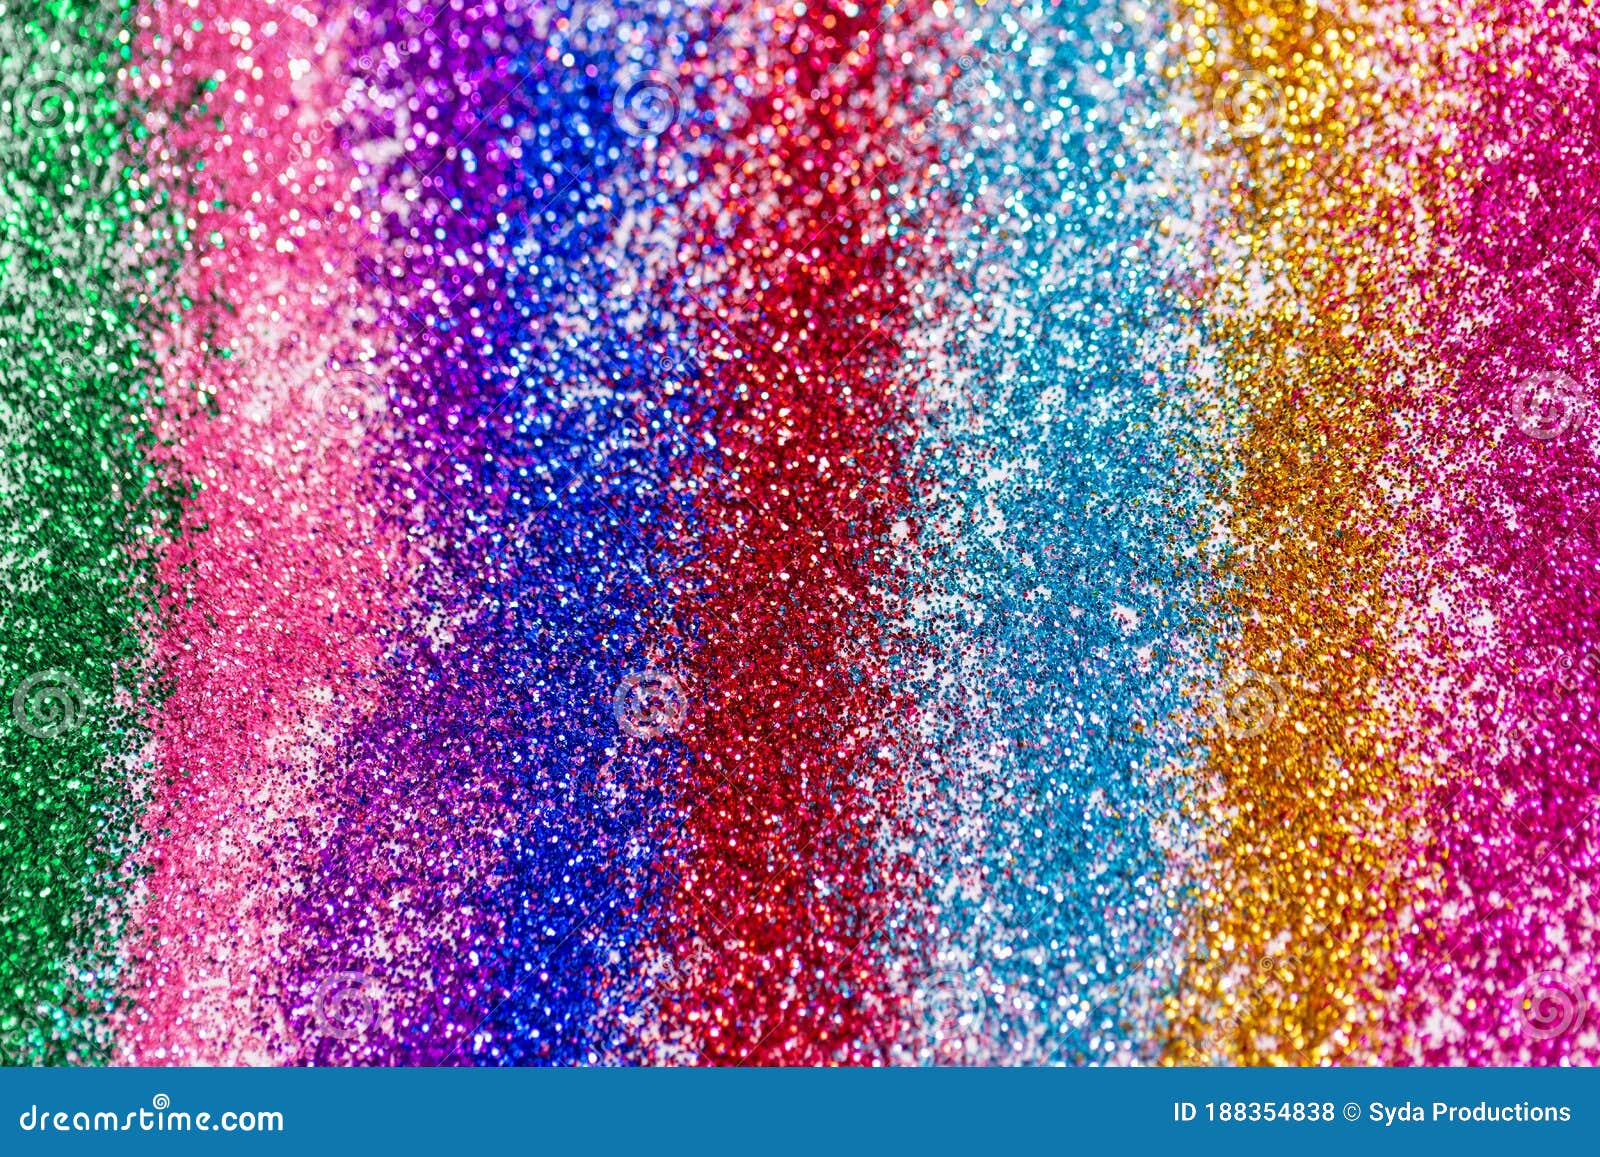 Multicolored Glitters Or Sequins Background Stock Photo Image Of